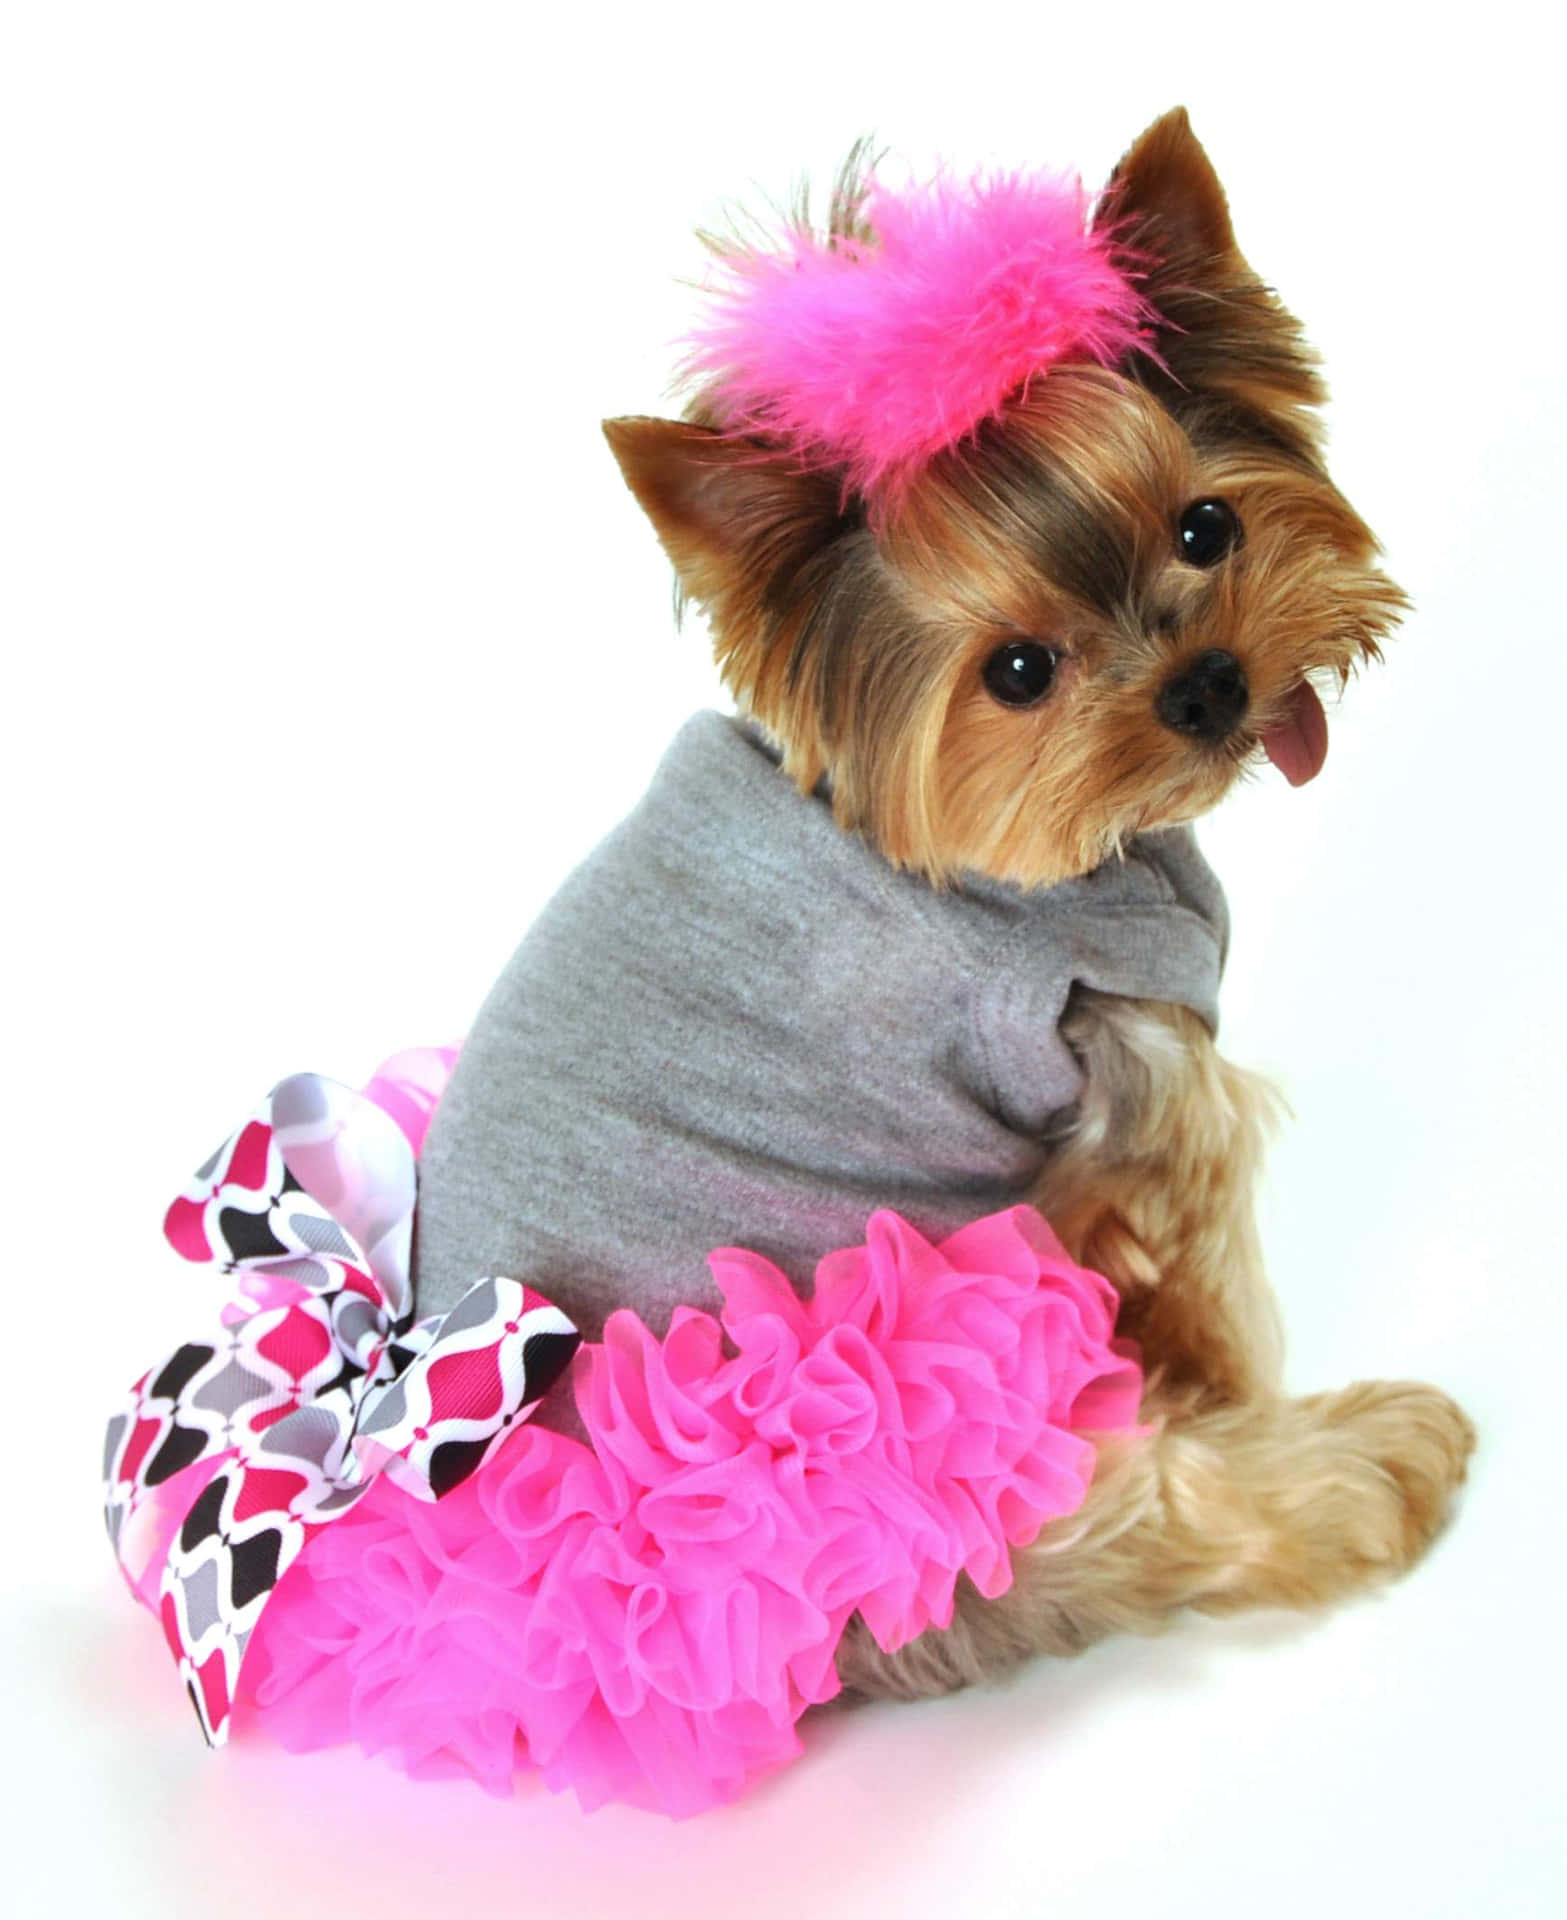 Stylish Pooch Dressed Up In Colorful Attire Wallpaper